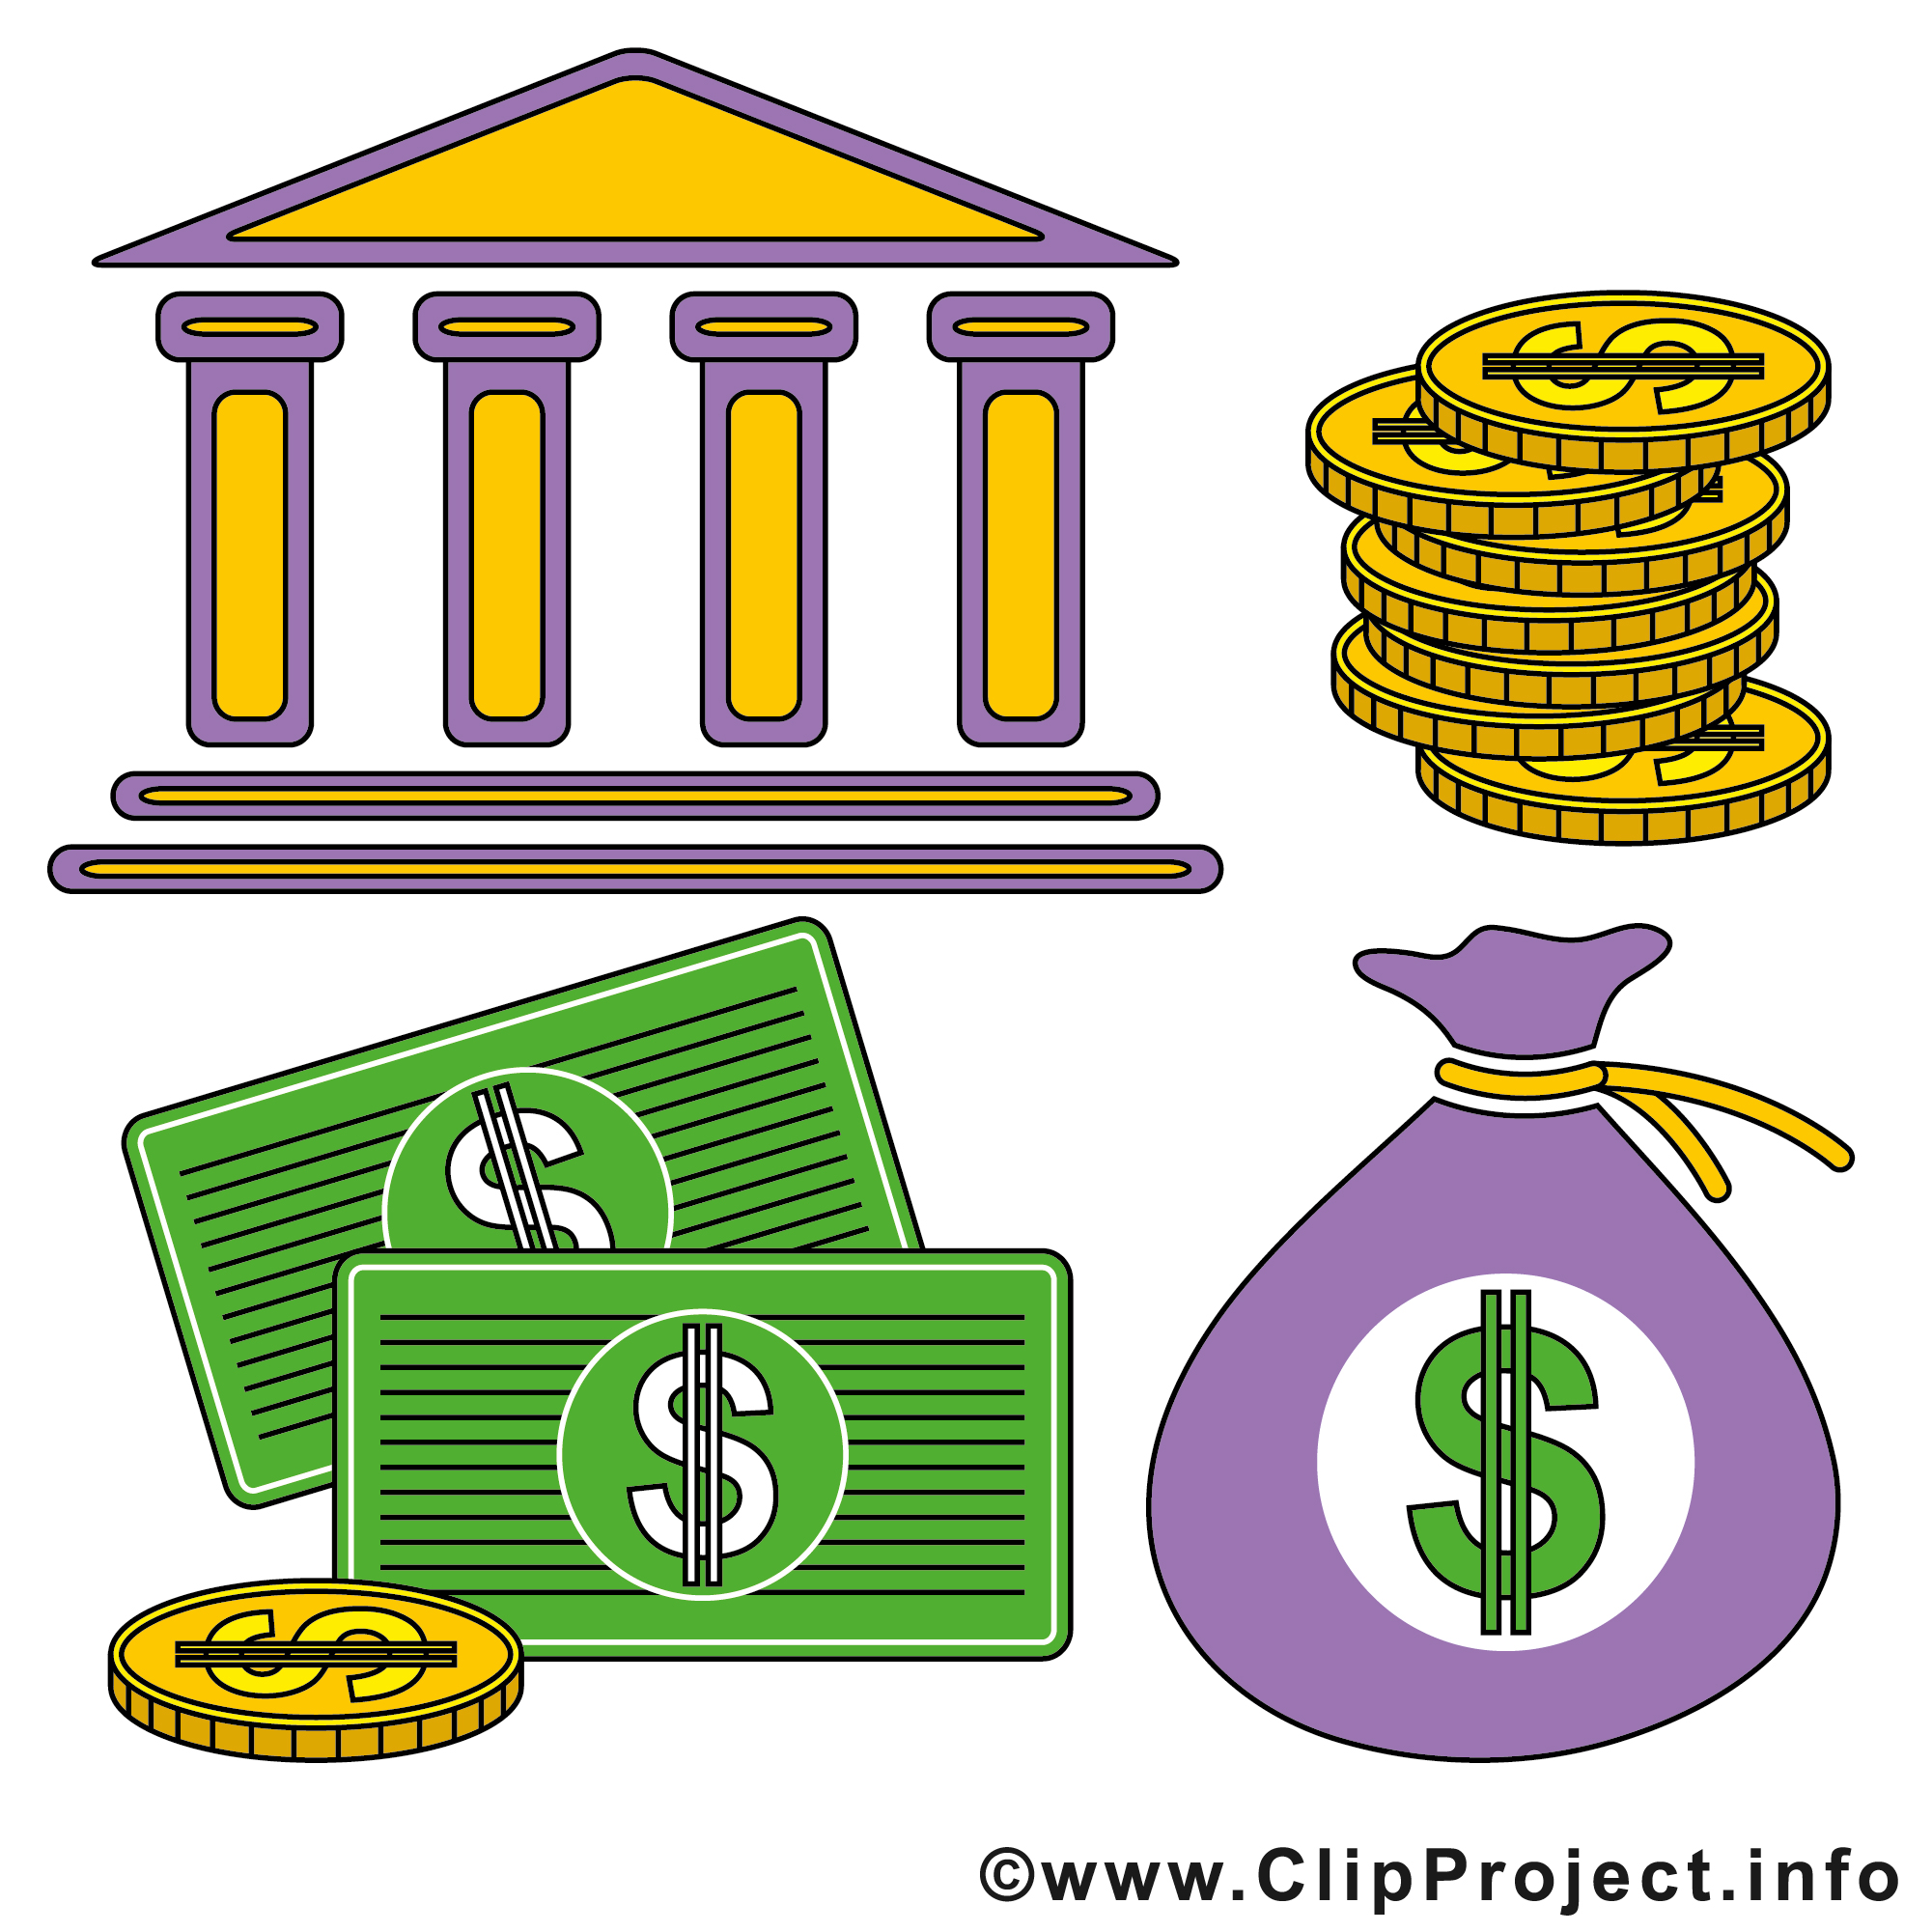 Clip art bank clipart cliparts for you